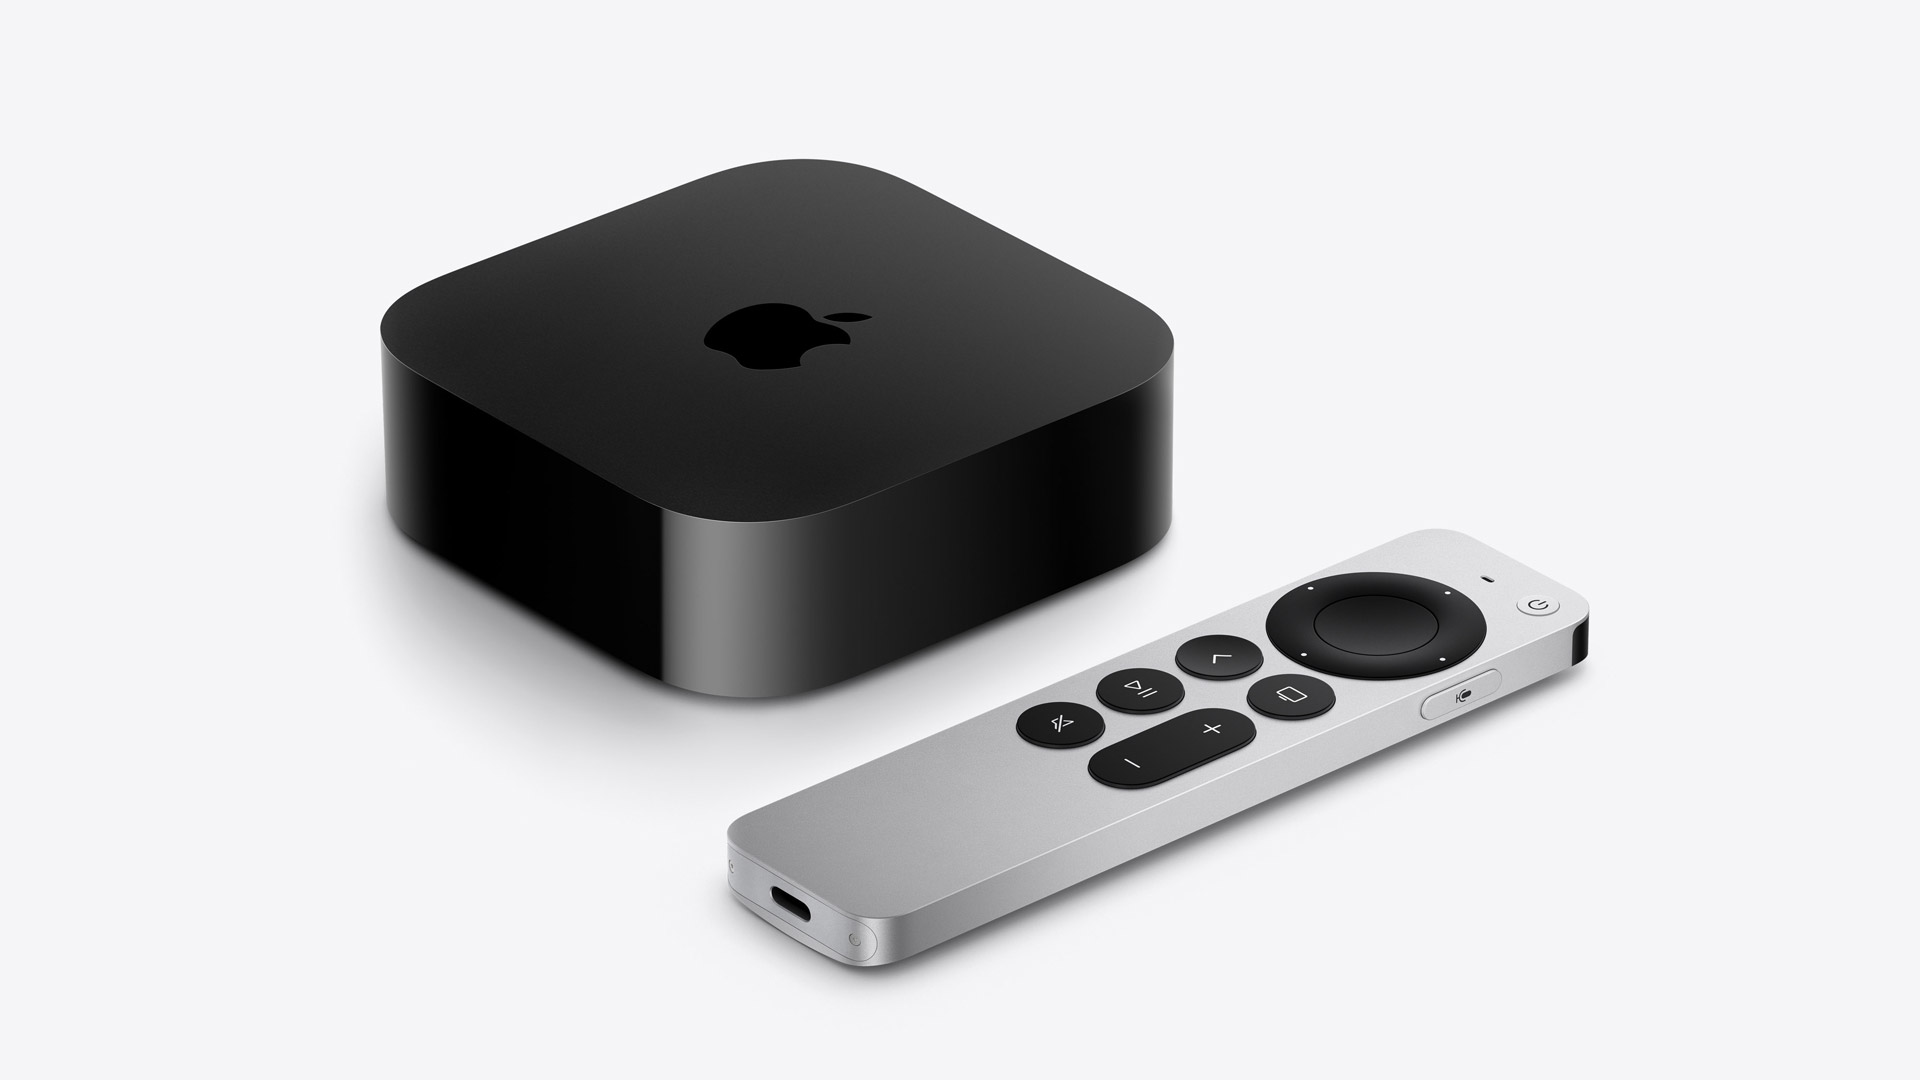 prosa Svare gallon New Apple TV 4K doesn't come with charging cable for Siri Remote